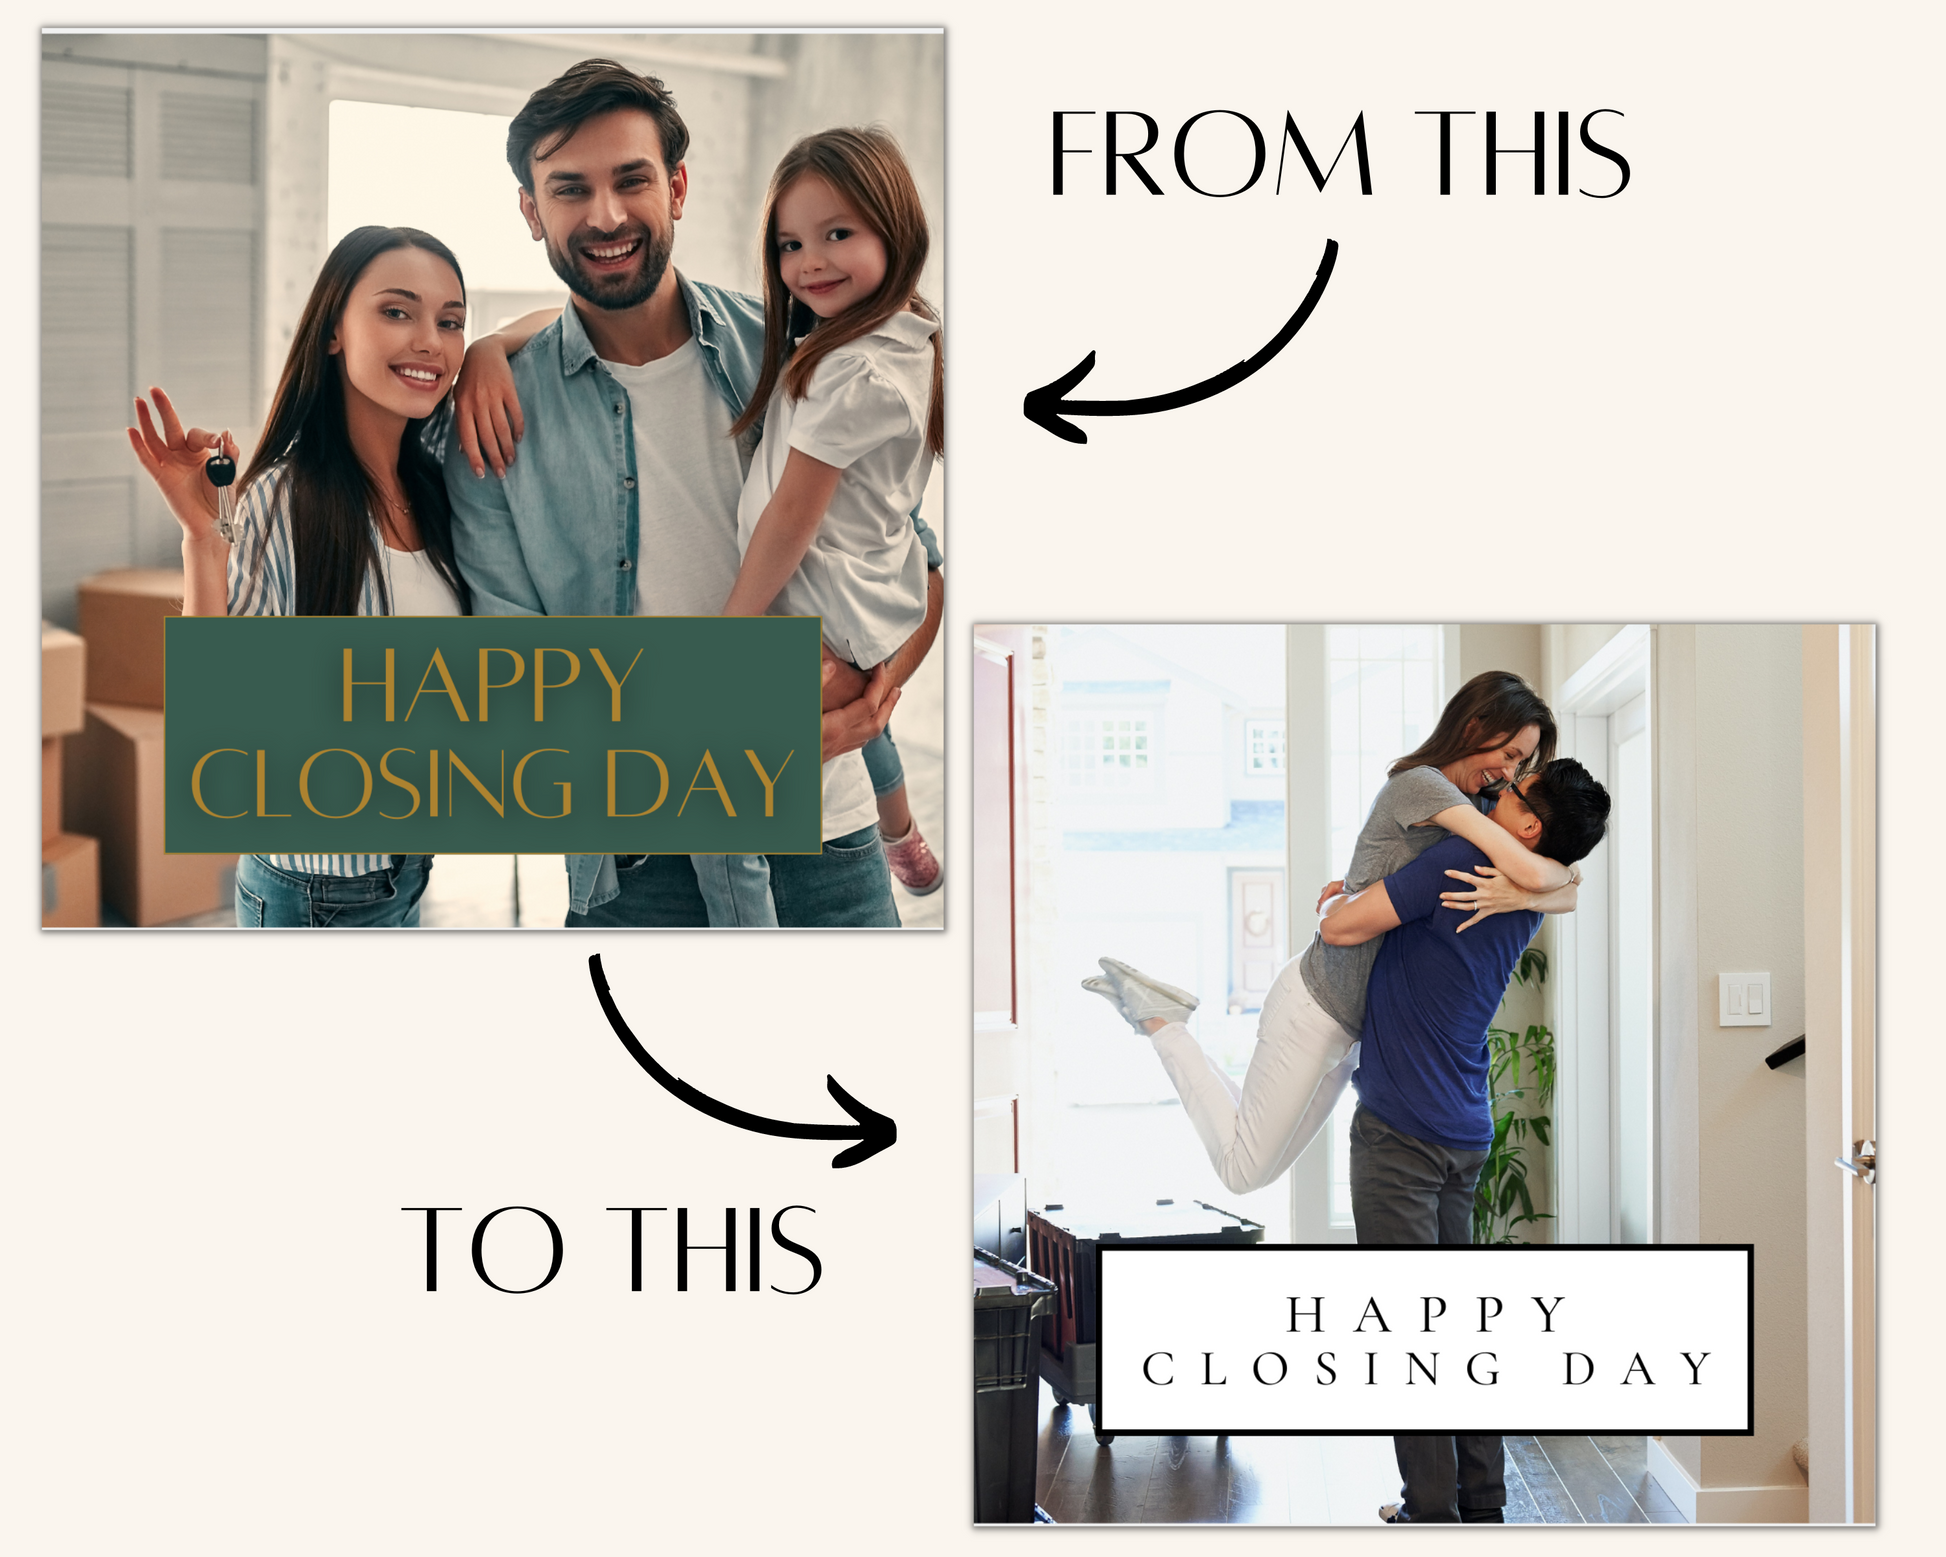 Real Estate Template – Happy Closing Day Social Media Posts